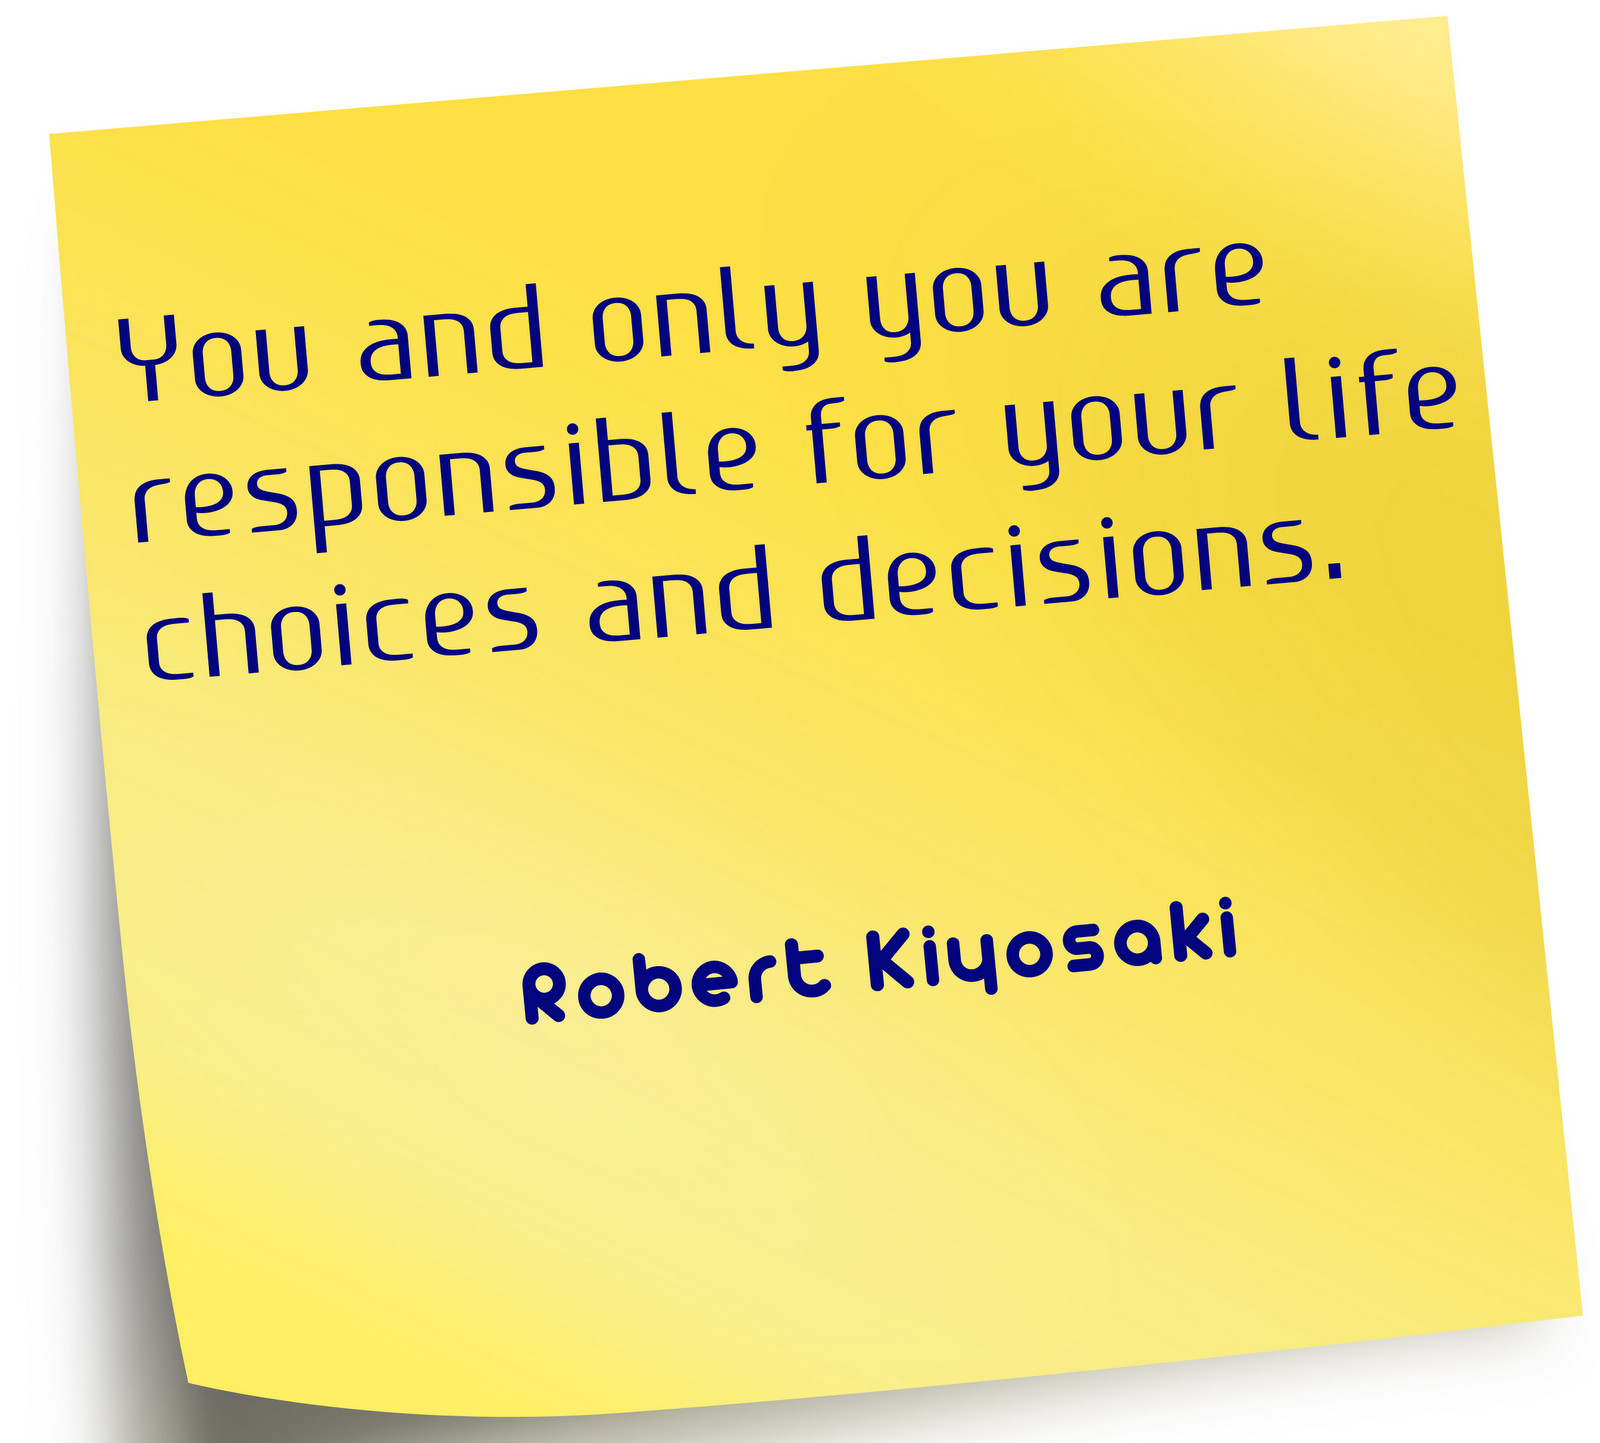 Life Choices Quotes
 Inspirational Quotes About Life Choices QuotesGram